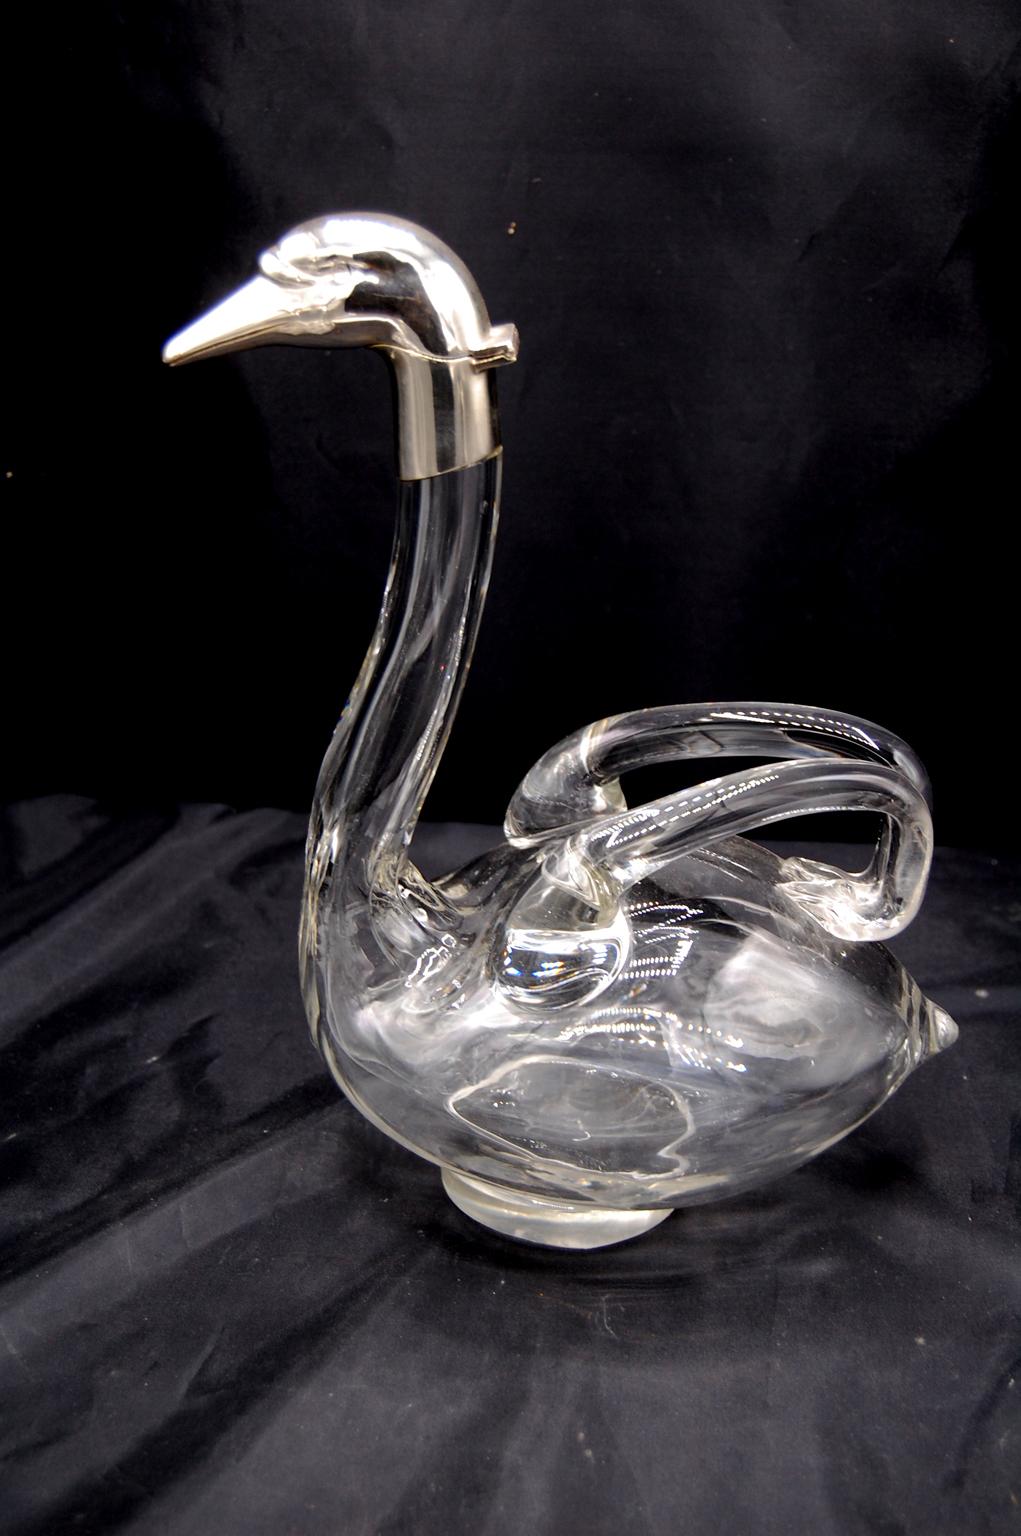  English pair of swan free blown glass decanters with silver plated head and neck.  These mid 20th century decanters are works of art.  The wings are the handles for pouring, each swan is slightly different, as if they are talking to each other, the